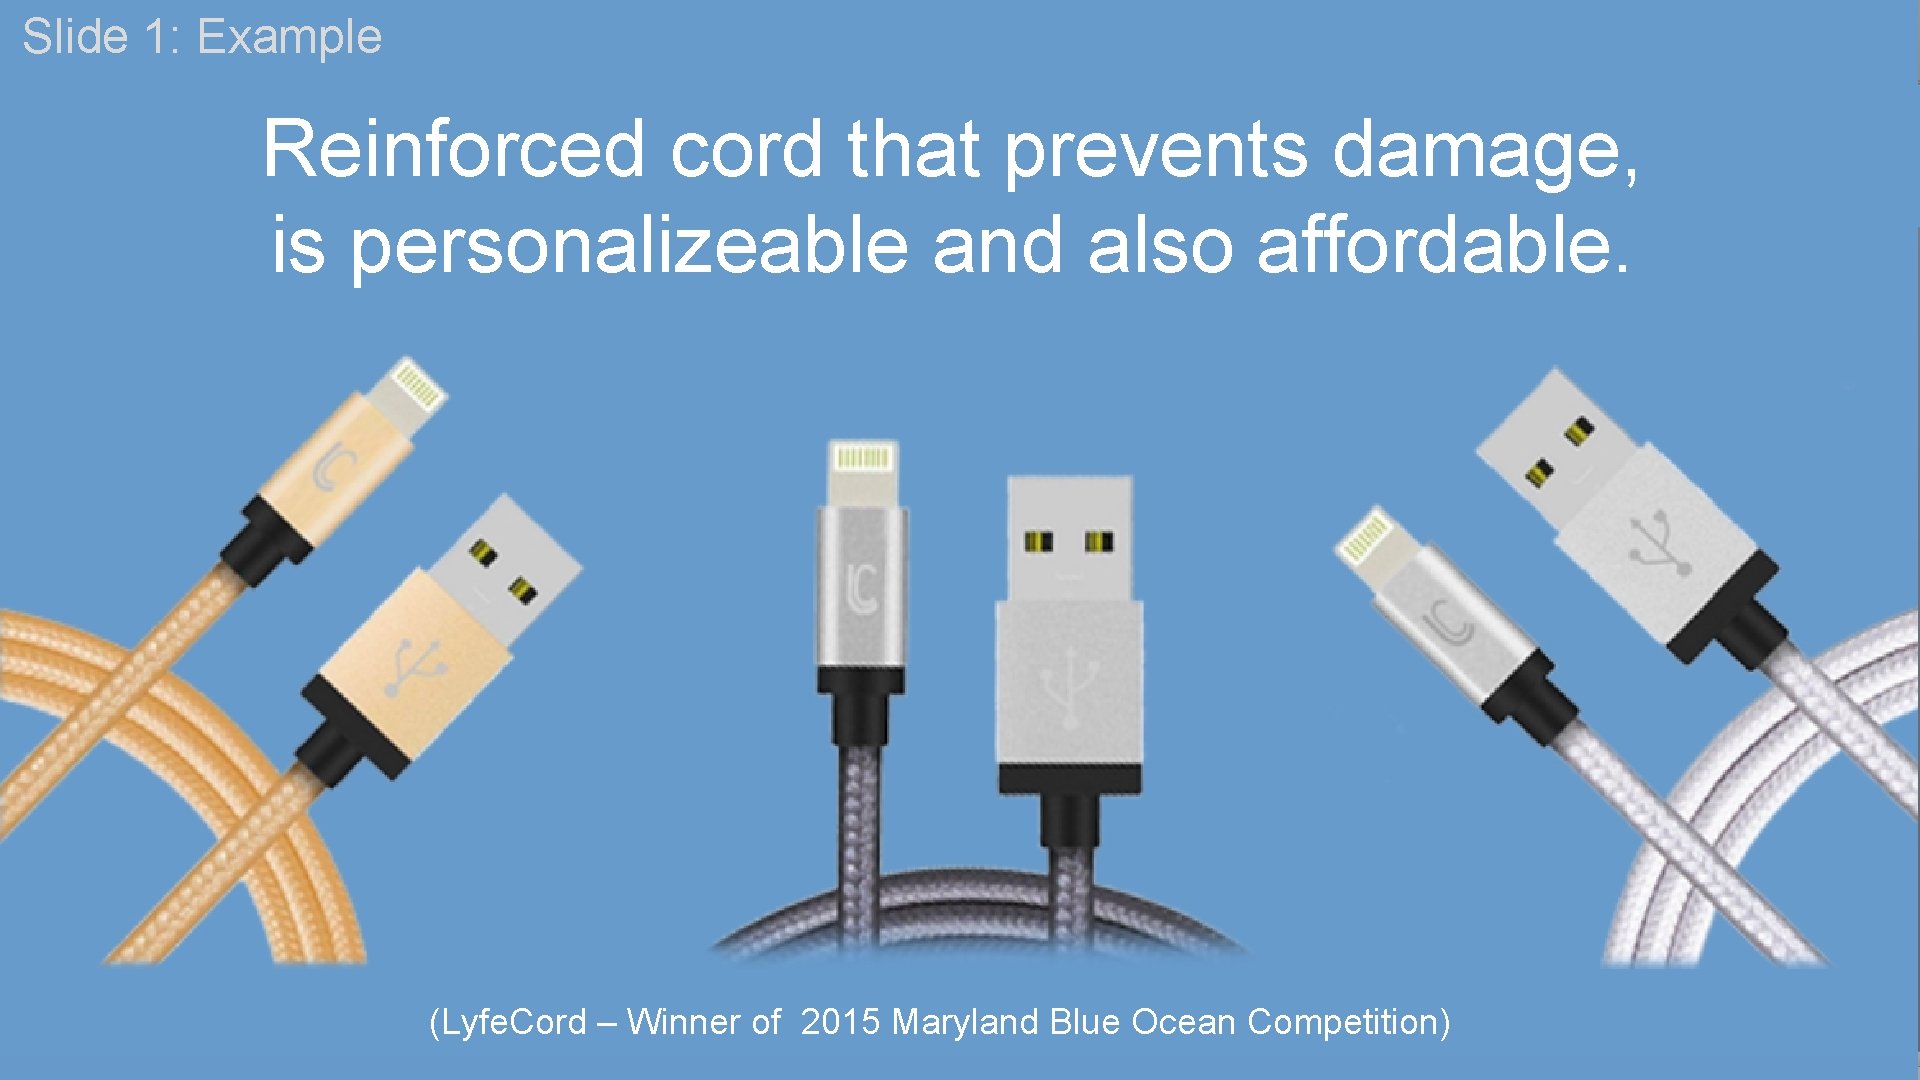 Slide 1: Example Slide 1: Your Blue Ocean Pitch Reinforced cord that prevents damage,